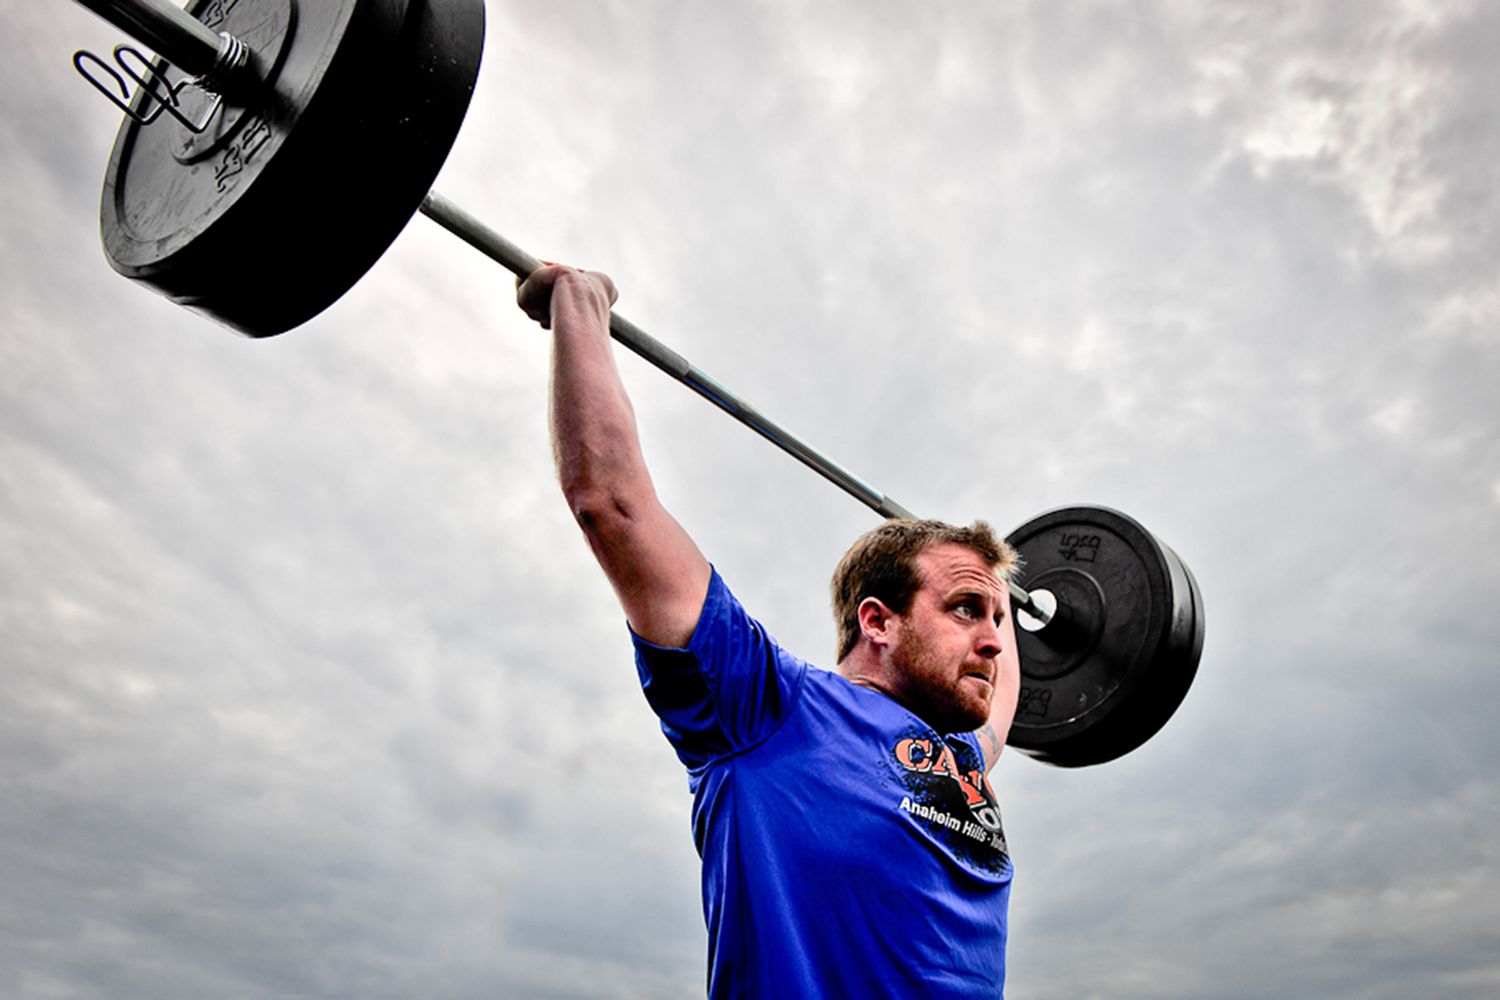 A man completes a push jerk overhead under grey skies.